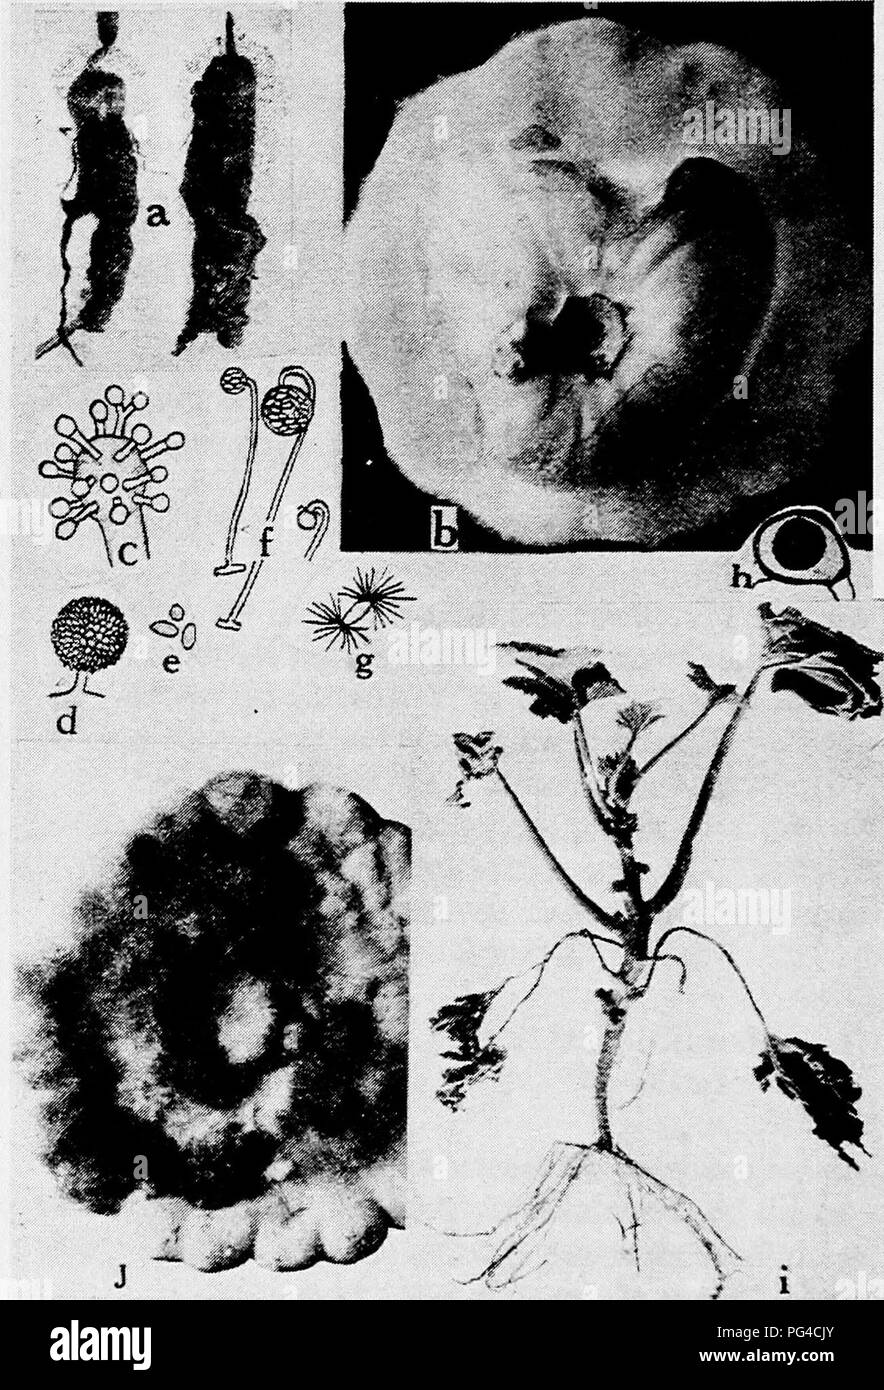 . Diseases of truck crops and their control . Vegetables. Fig. 41. Squash Diseases. a. Showing squash blossoms invaded by the fungus Choanophora cucurbitarum, b. squash entirely rotted by the Choanophora '--- iA;^^,r.^^ âÂ» Choanophora with ramuli developing on the prirji&quot;&quot;-' - - â covered with a layer of conidia, e. conidia,/. sporanKm ^^iw !,â .. ^.i.ti. , 4^. Mi.. t,iii^&gt;t spores with tufts of h^r-like appendages, h. m.i      j-j. , , ' ,. Wolf), i. Fusarium wilt of young squash plants,;. Please note that these images are extracted from scanned page images that may have been  Stock Photo